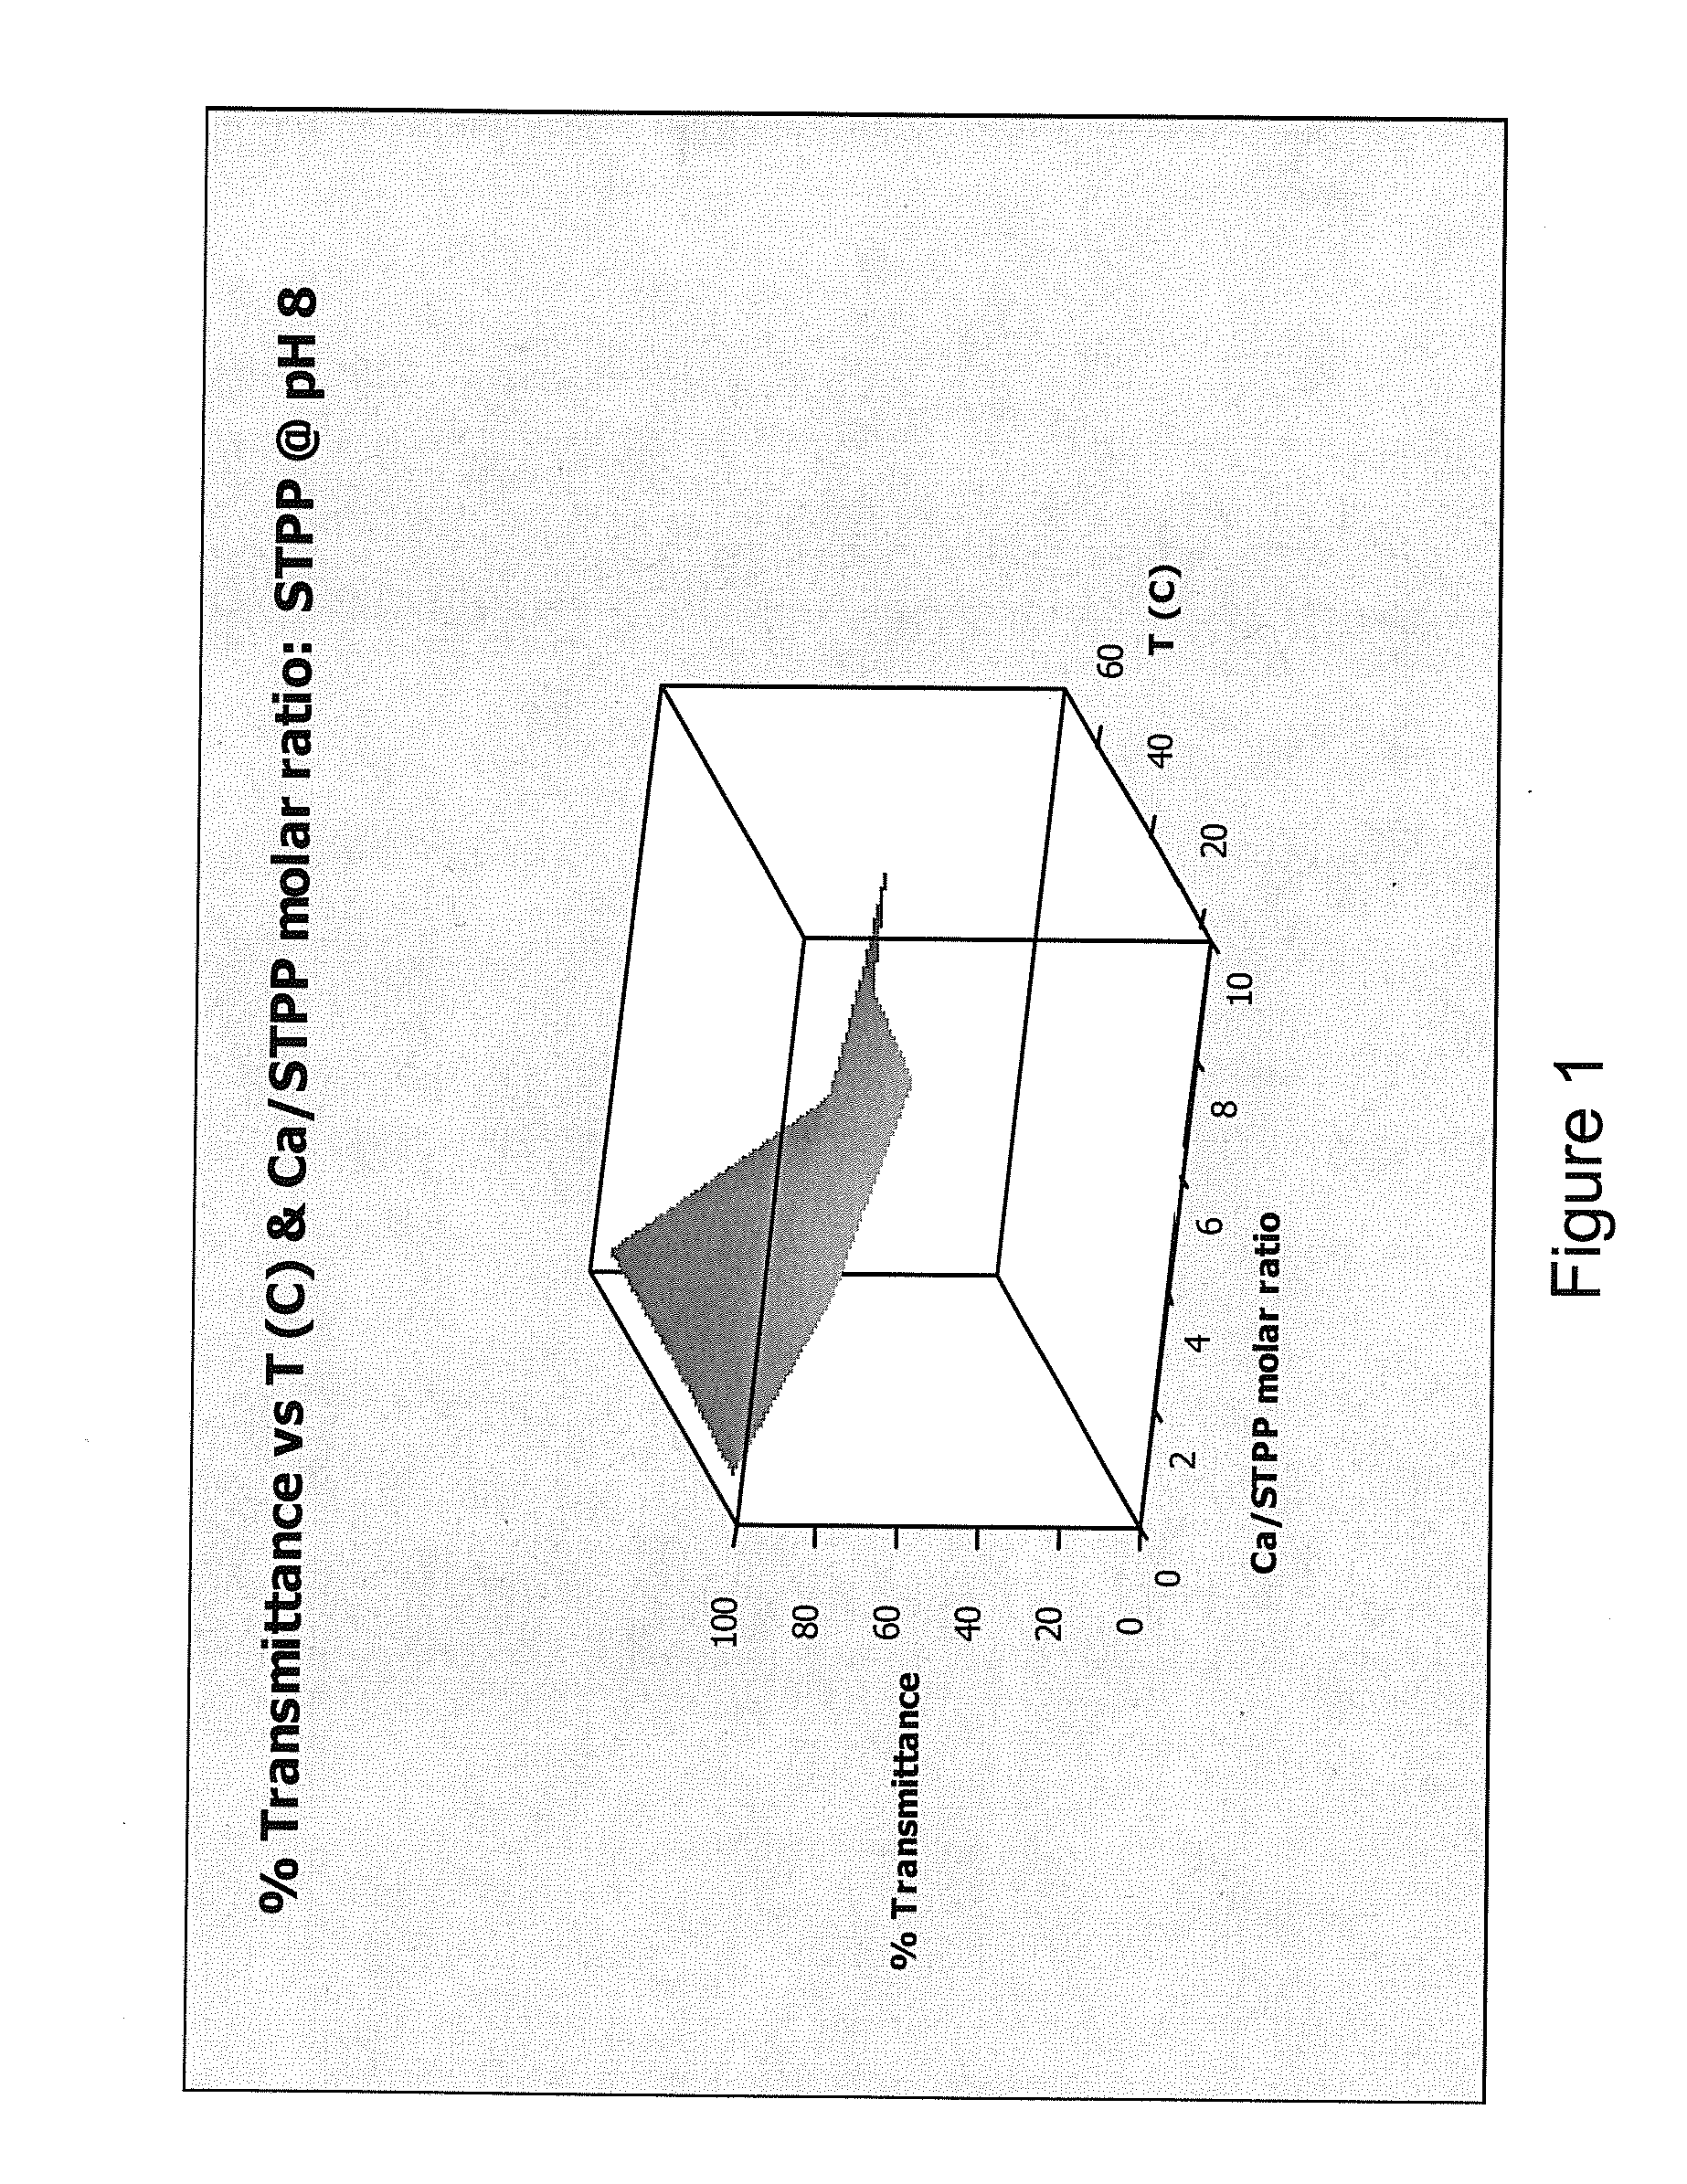 Cleaning compositions containing water soluble magnesium compounds and methods of using them